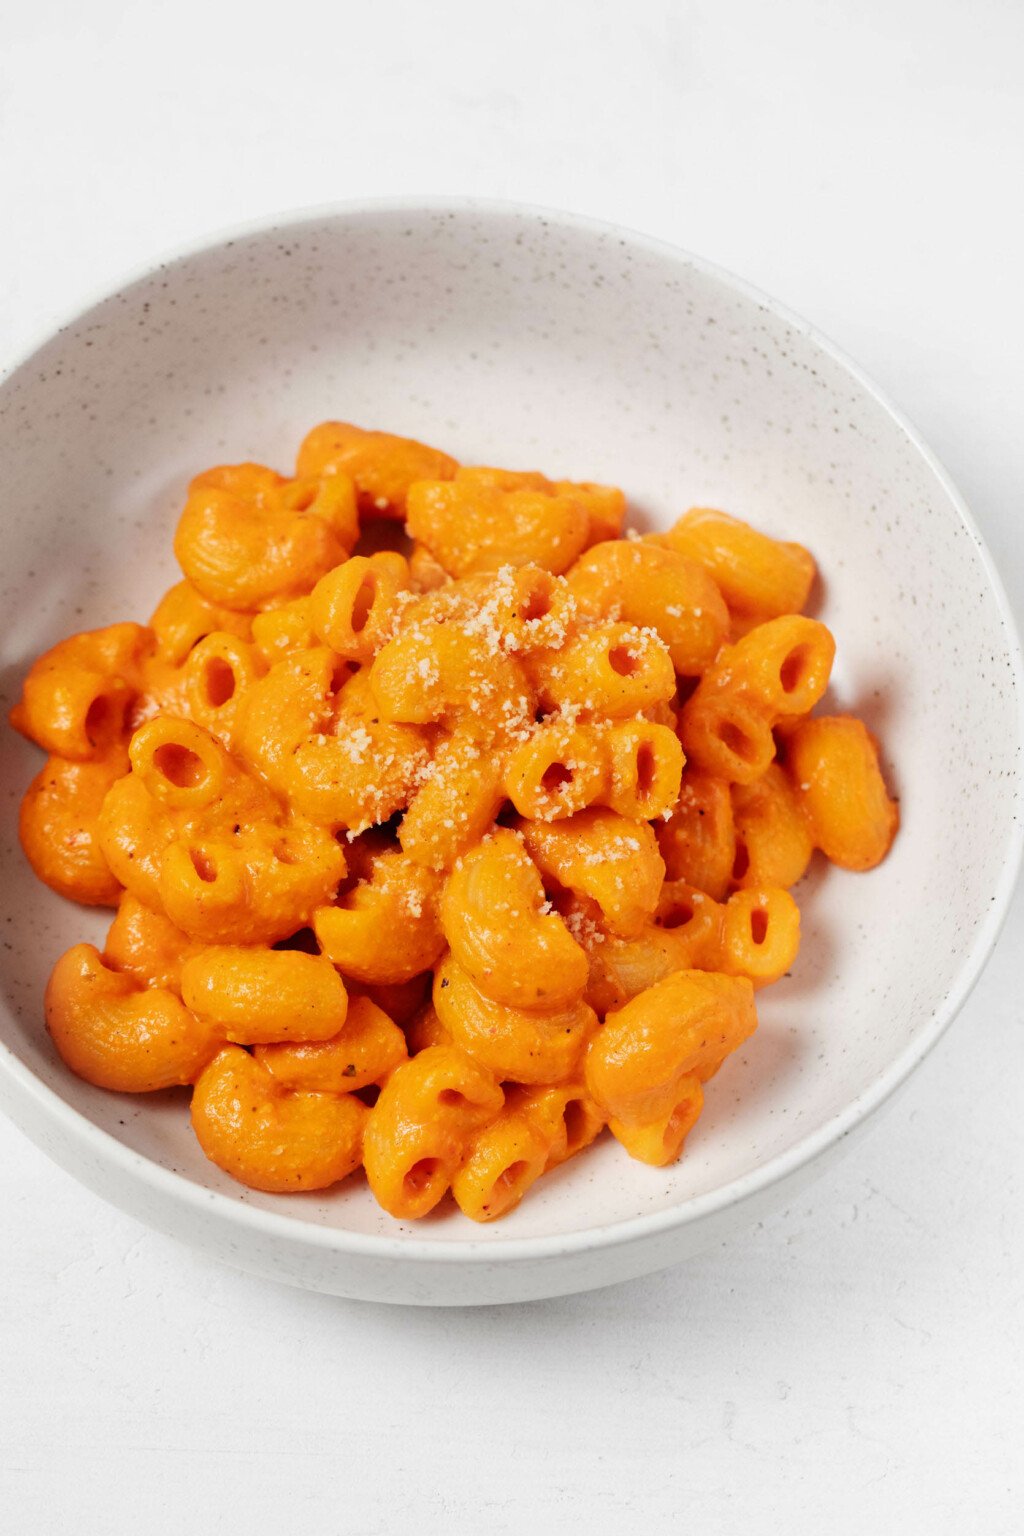 A round, white ceramic bowl has been filled with a plant-based mac and cheese. The mac and cheese has red peppers in the sauce, so it has a lovely orange color.